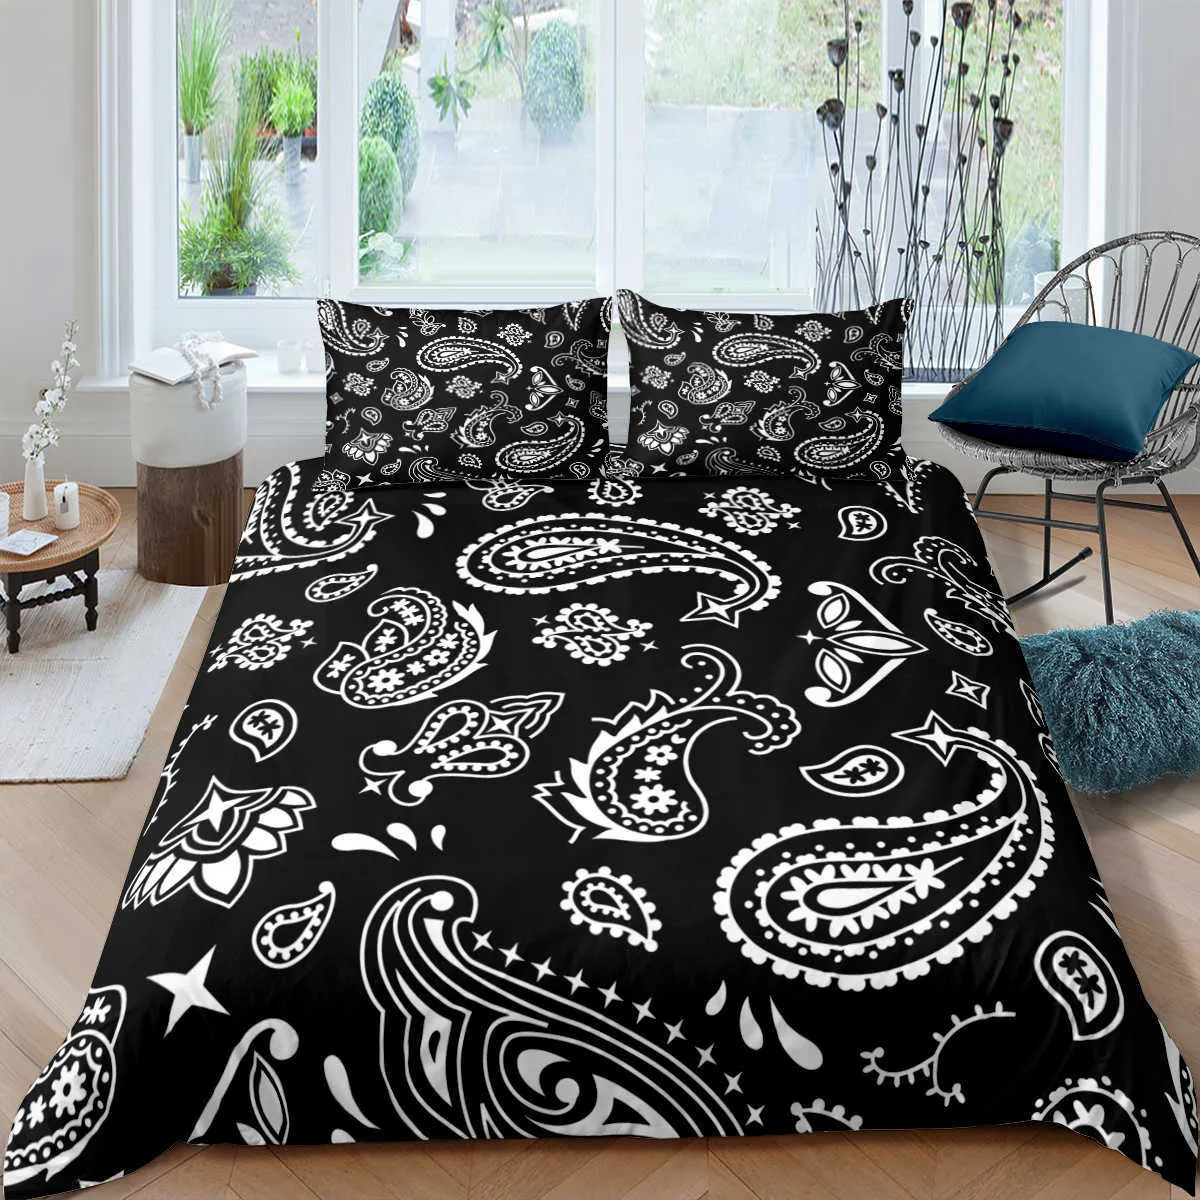 Paisley Bandana Printed Duvet Cover Bedding Sets With Pillow Case Luxury Bedspread Single Full Queen King Size H09137463427